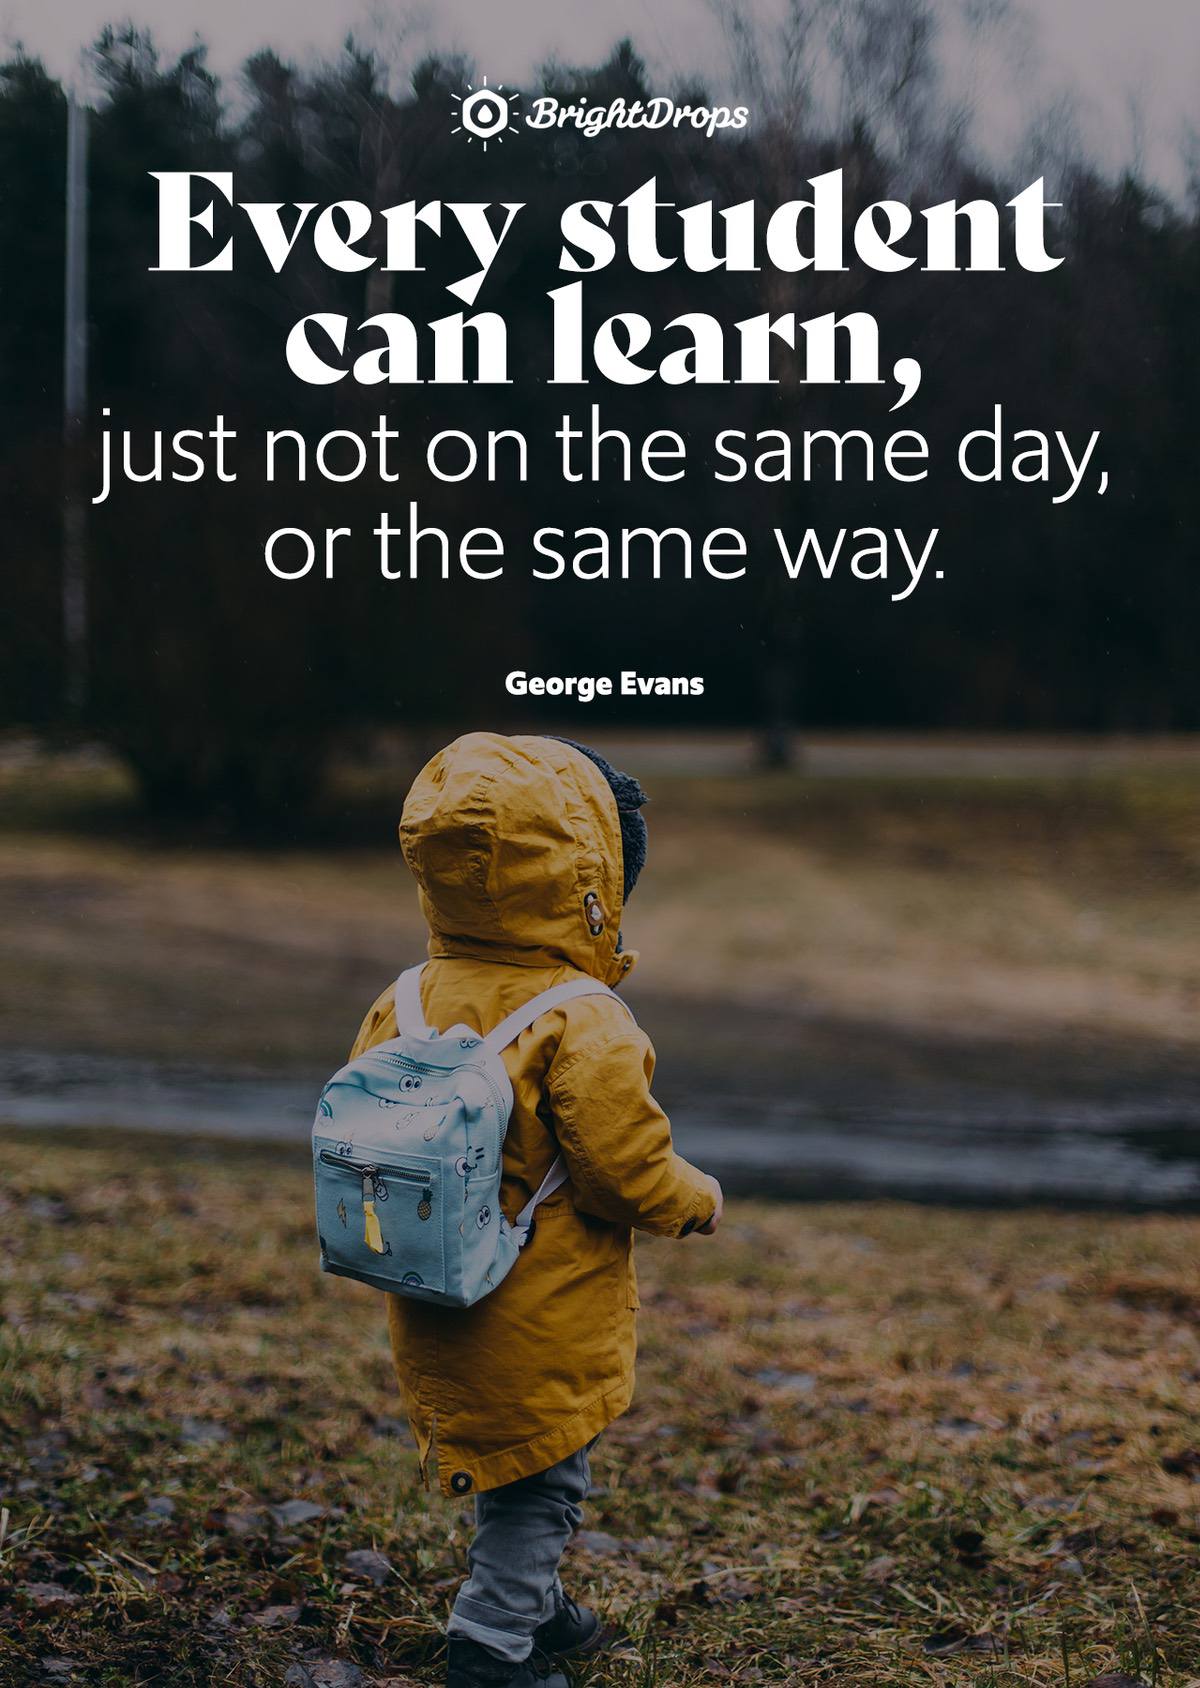 61 Most Uplifting and Inspirational Quotes for Teachers - Bright Drops